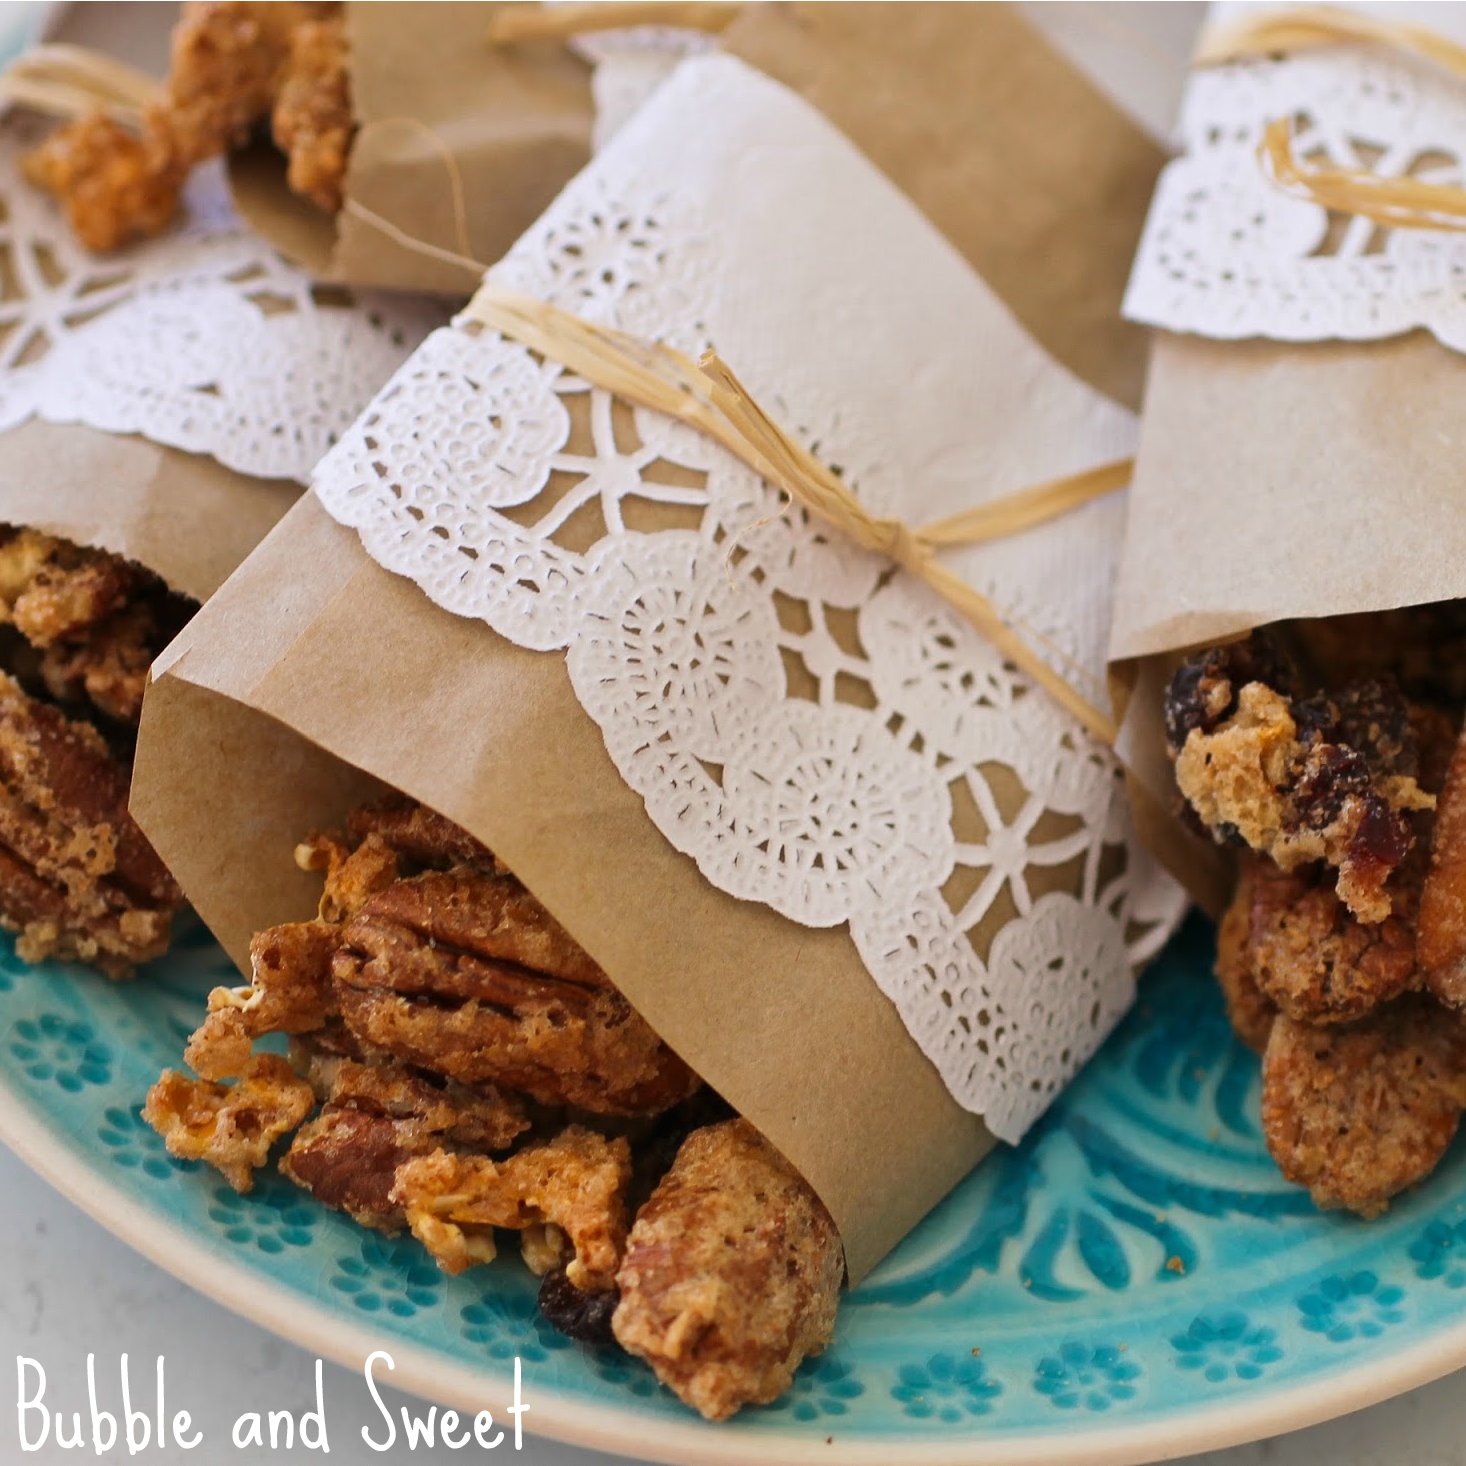 Bubble and Sweet: DIY mini brown paper and doily snack bags